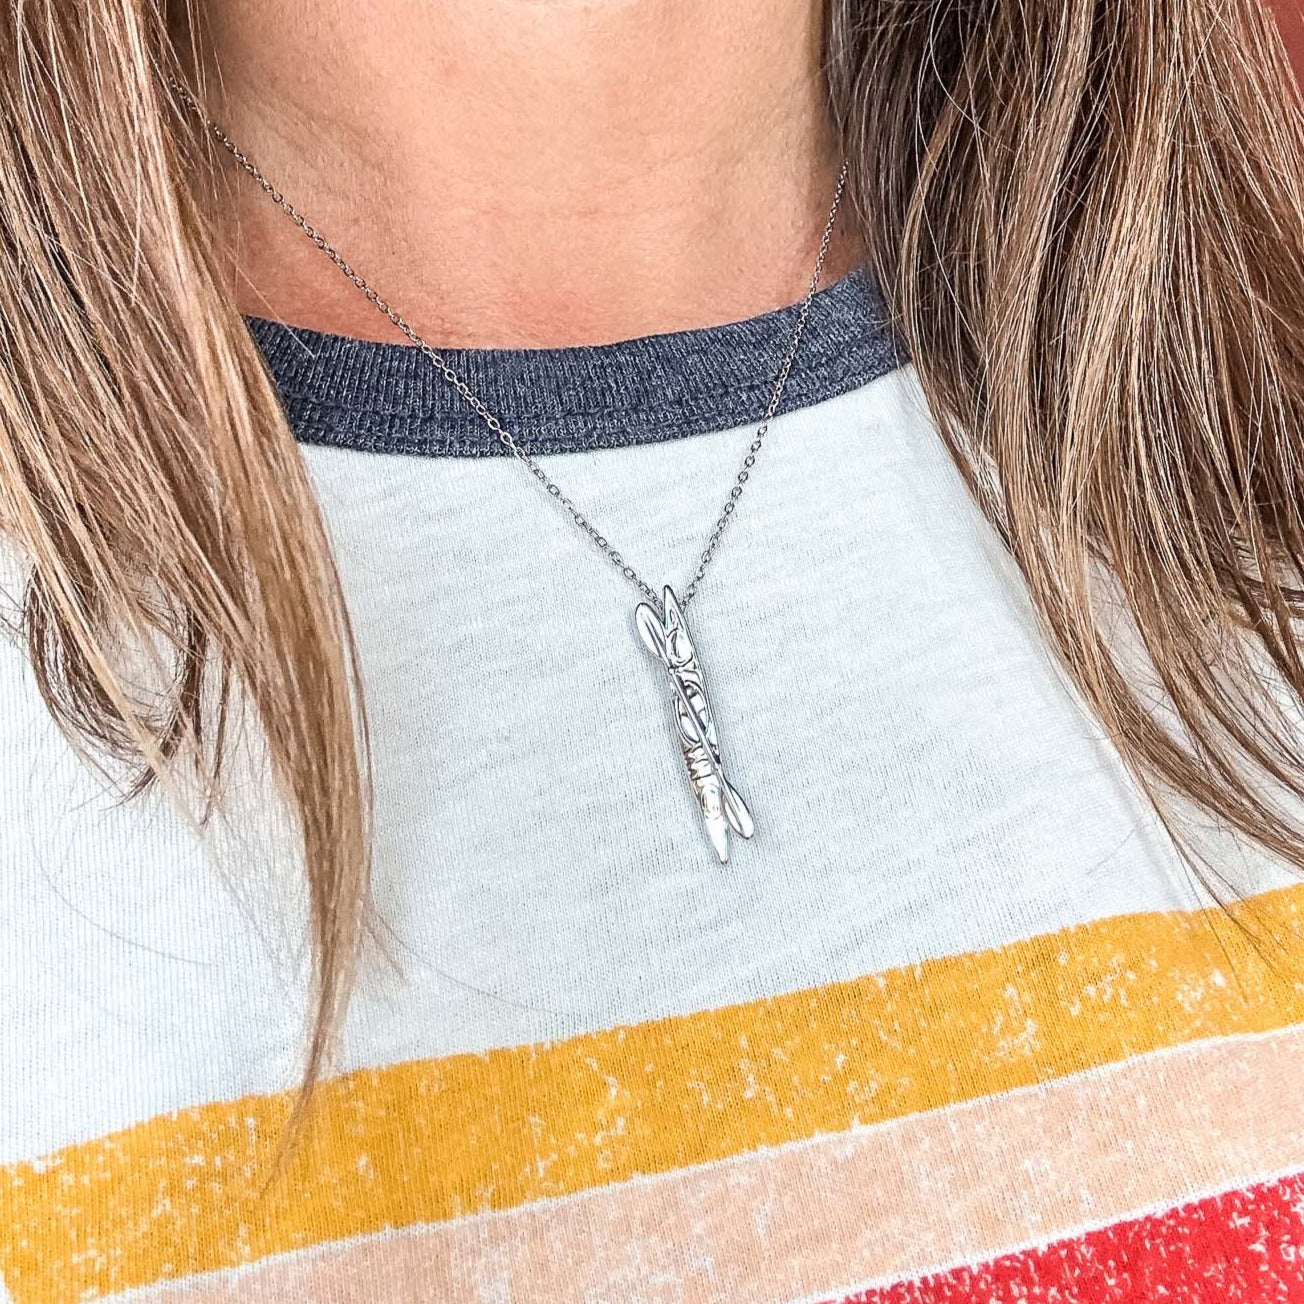 Silver Kayak Pendant Necklace made by Born to Rock Jewelry. Based in San Diego, California. Kayak, kayaking, Beach, Ocean, Sports, Water Sports Accessories, Outdoor Adventure & Surf Shop.